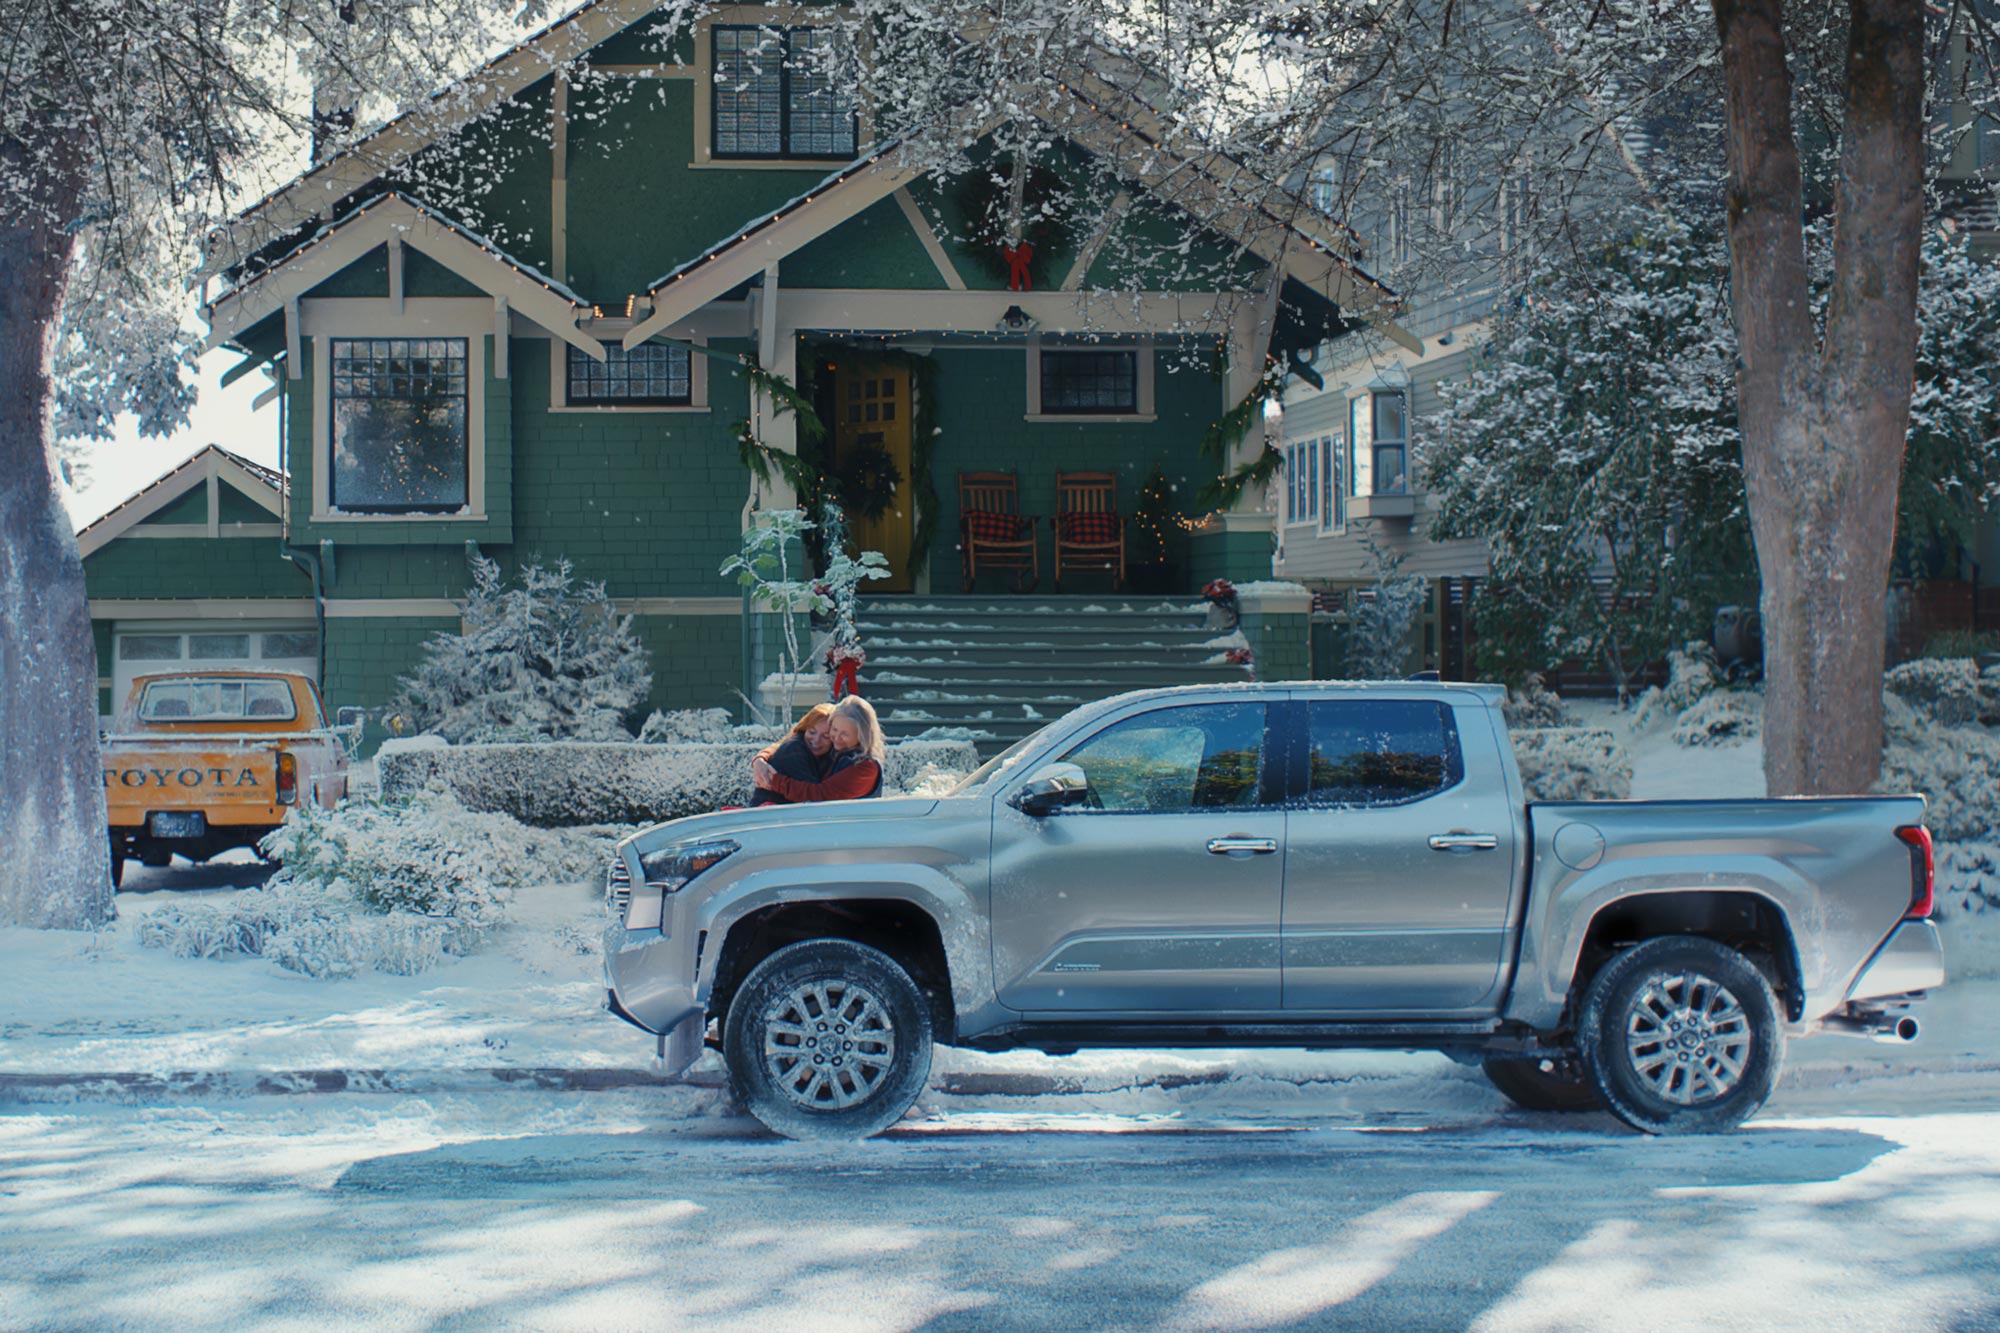 Two Toyota trucks in a television advertisement